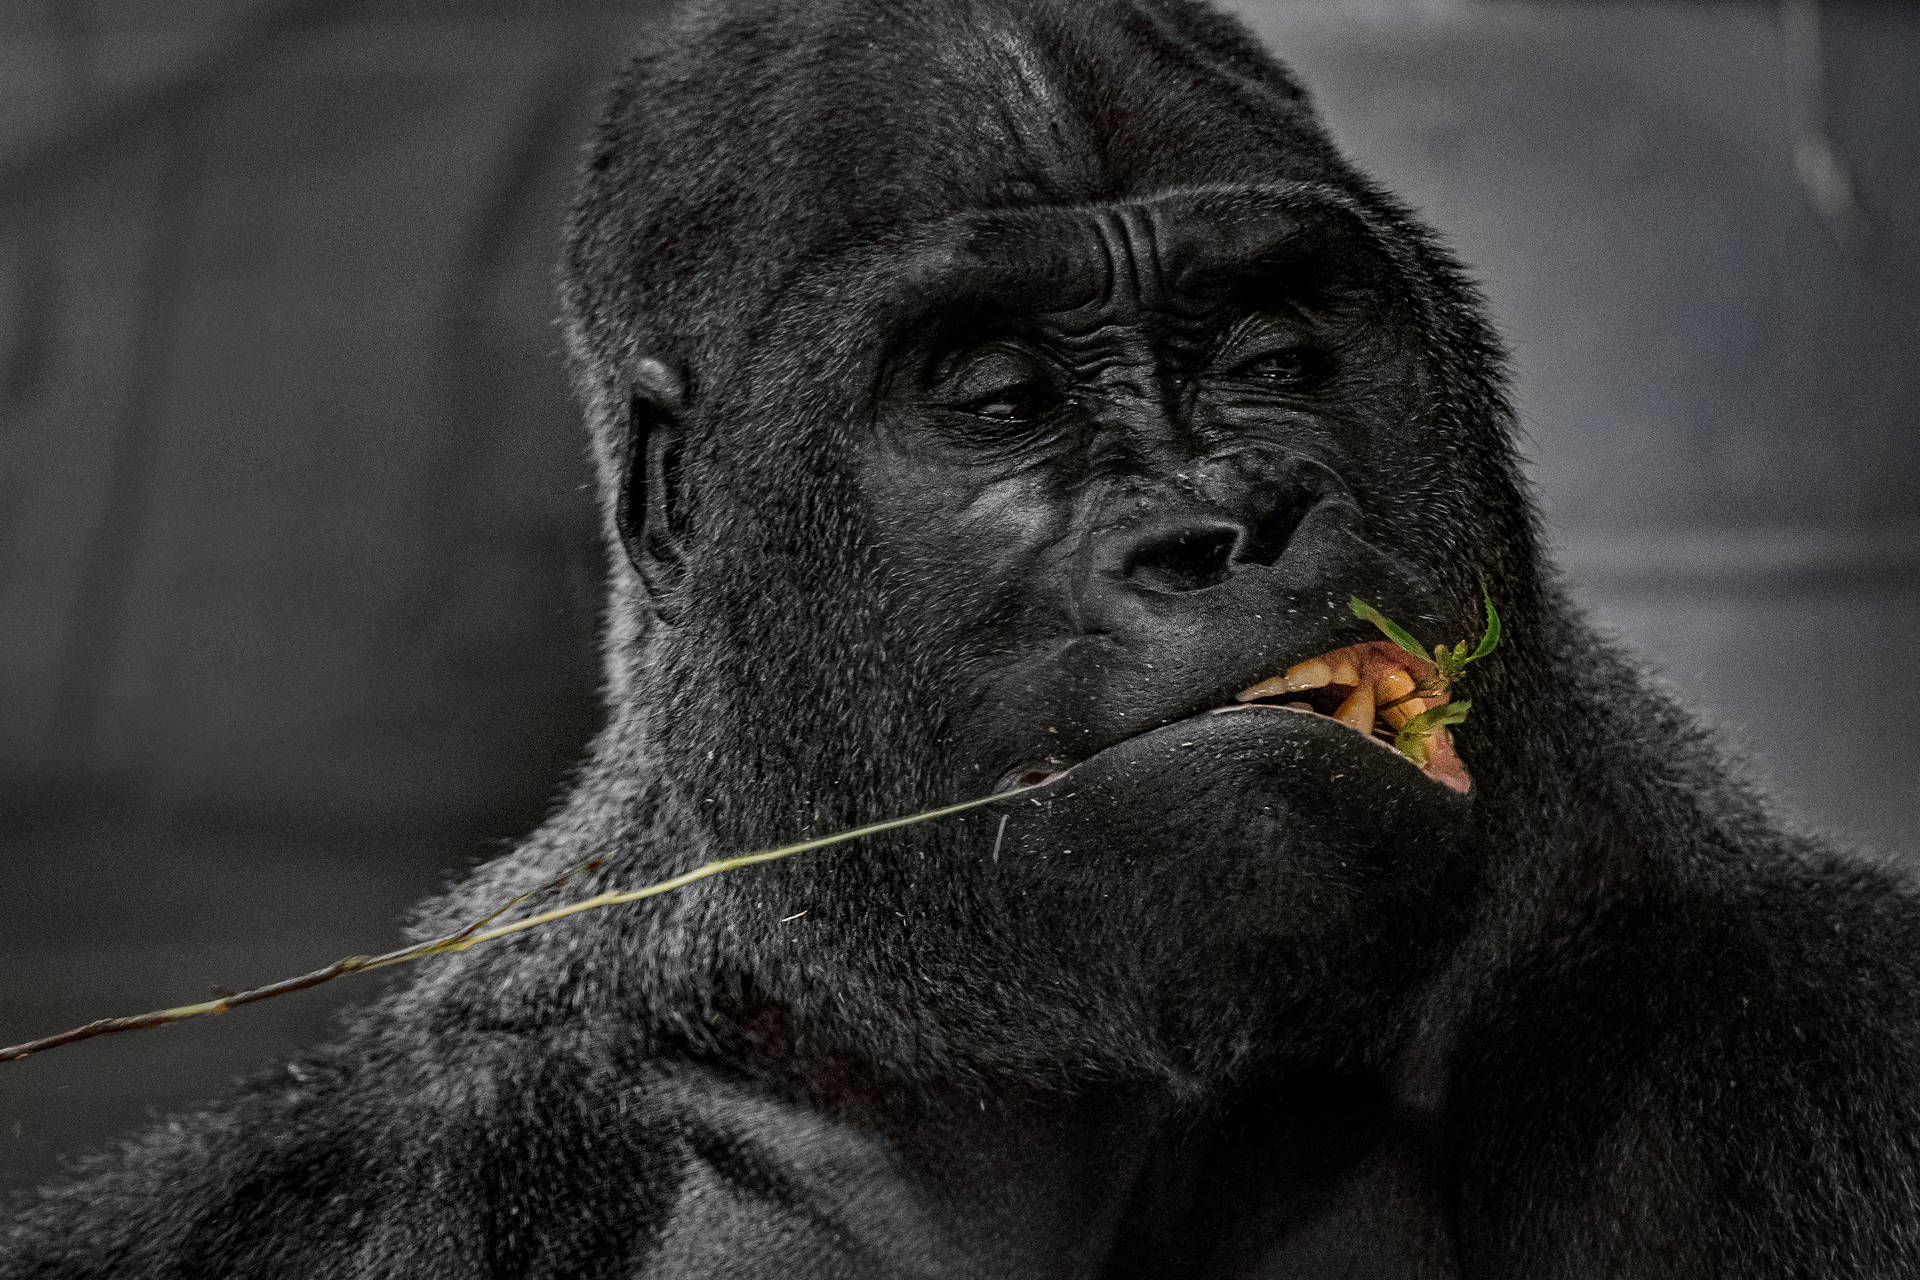 Gorilla 3936X2624 Wallpaper and Background Image